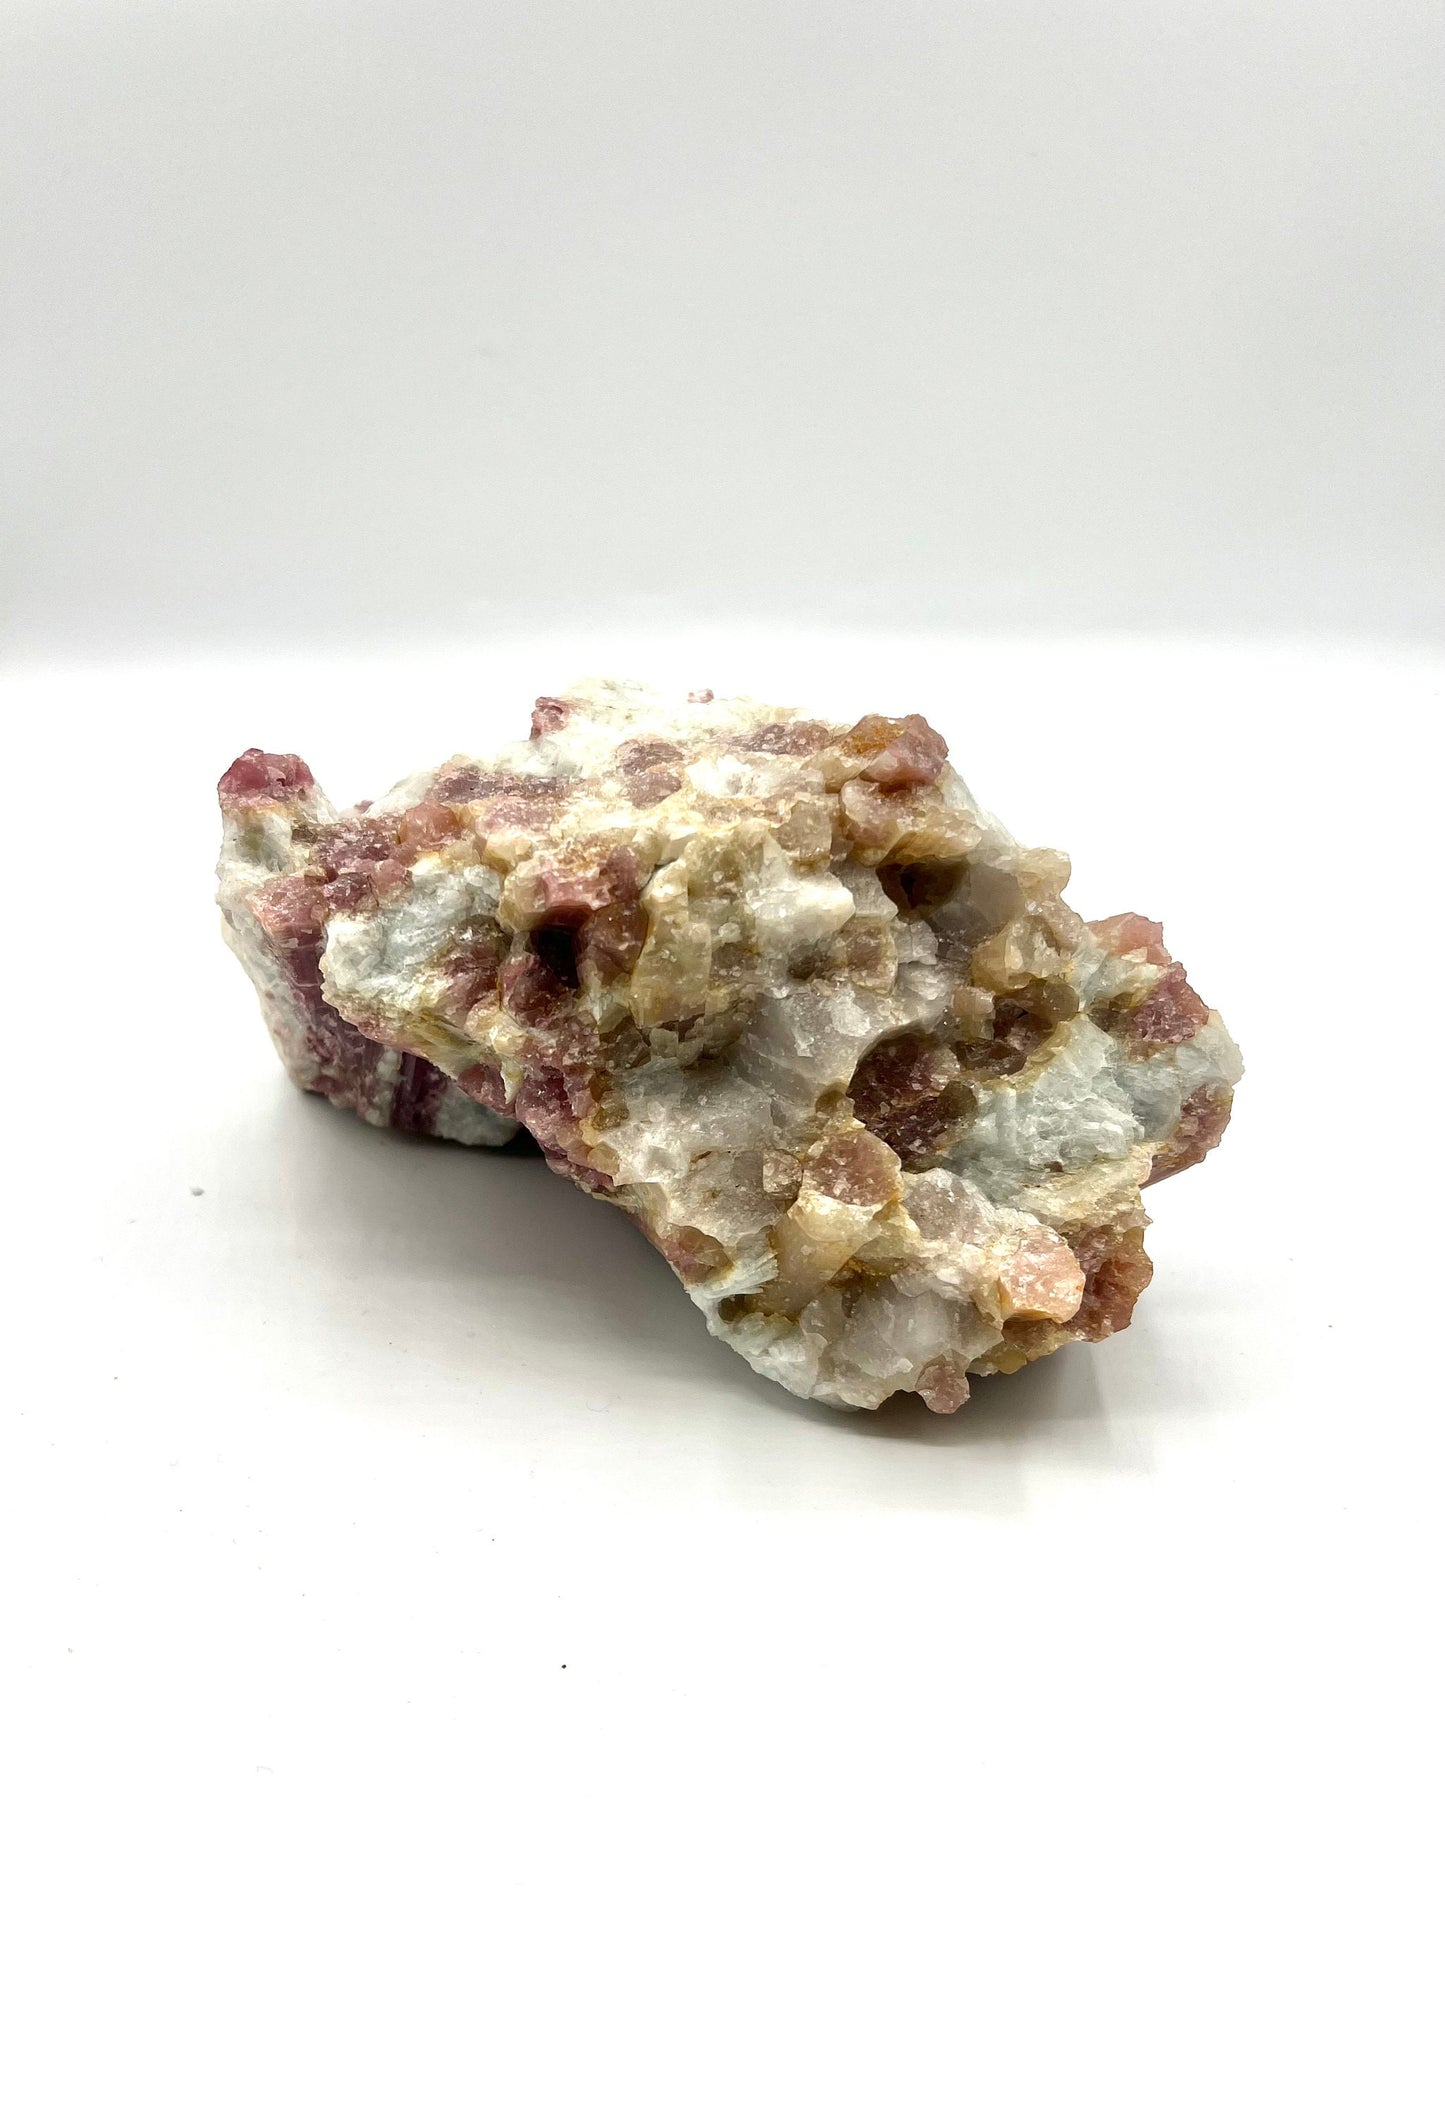 Large Pink Tourmaline crystal Rock For Healing, love, joy and happiness to fill your life. 4.12lb